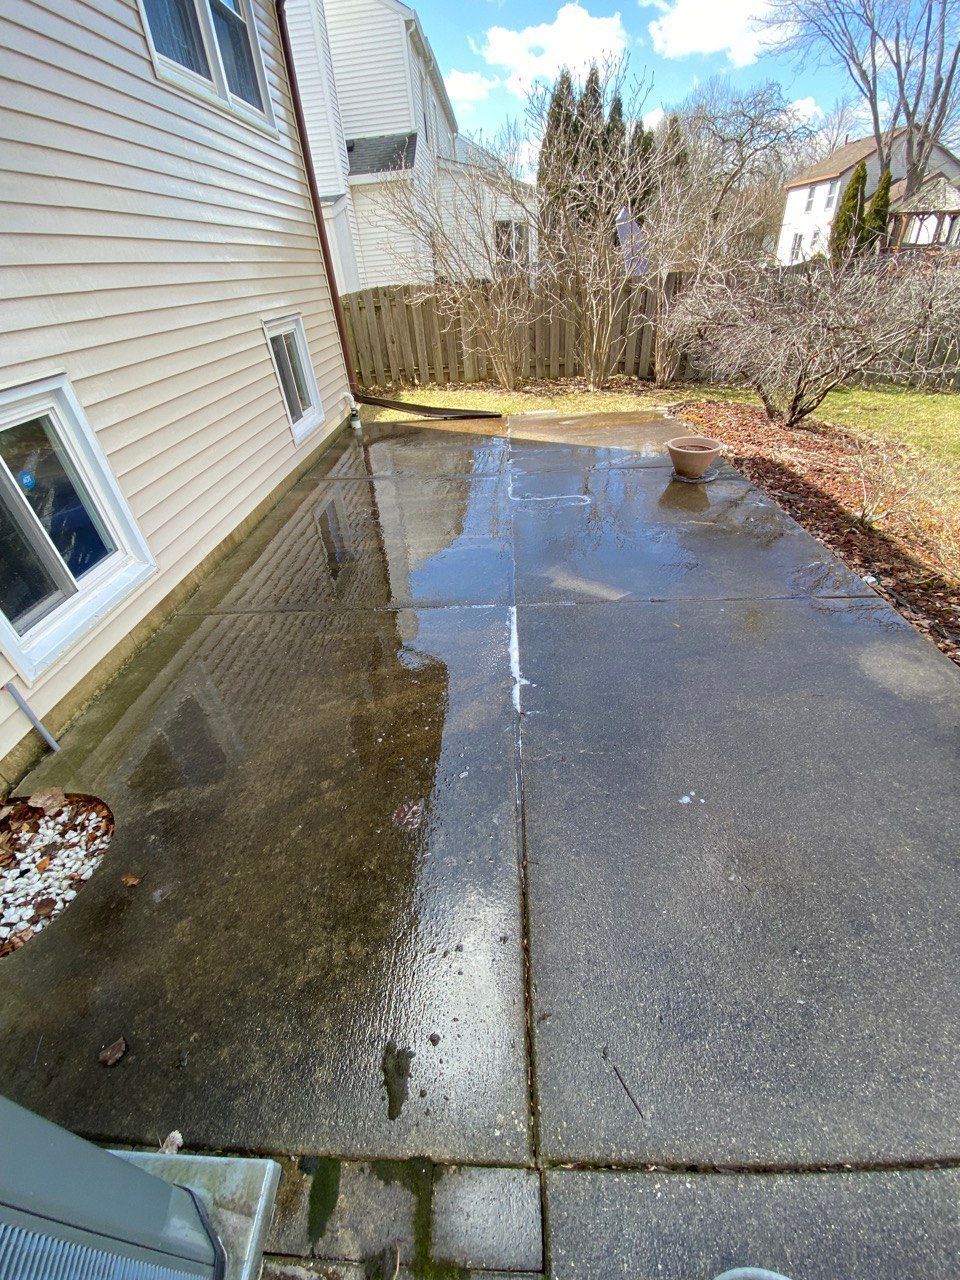 Watery Flooring - Lake Zurich, IL - Peter’s Power Wash Services